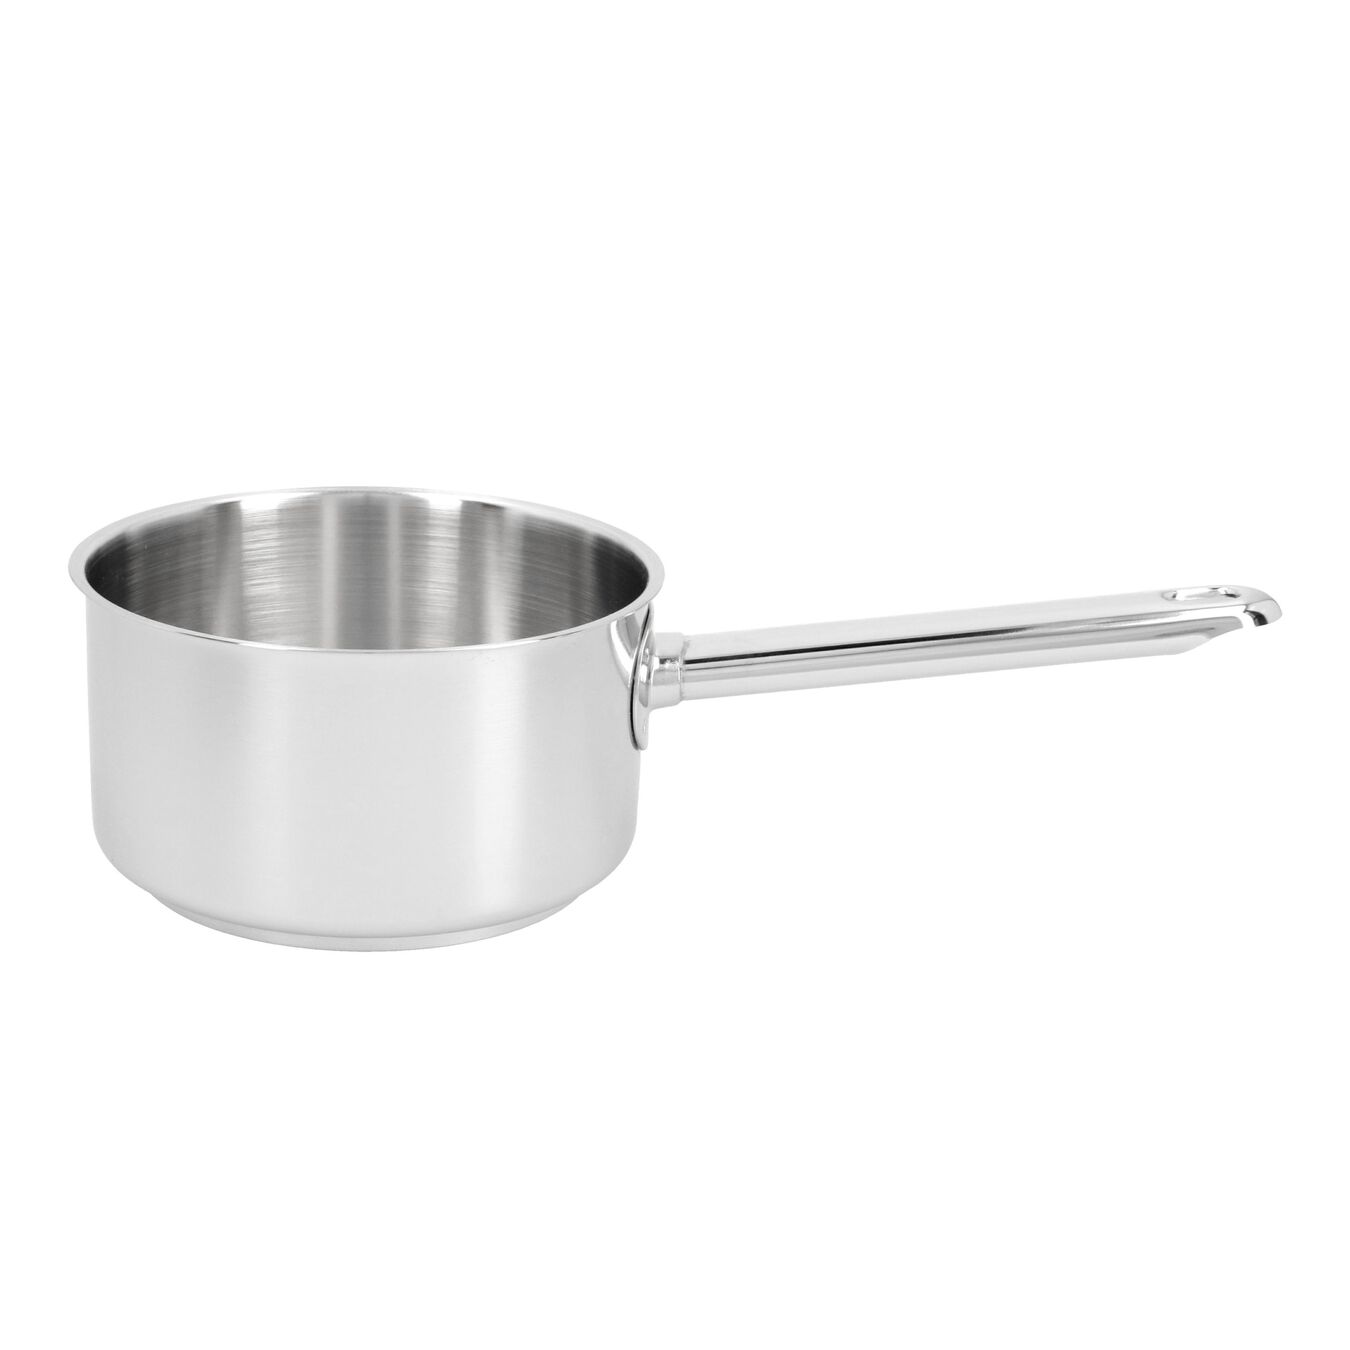 14 cm 18/10 Stainless Steel Saucepan without lid silver,,large 1